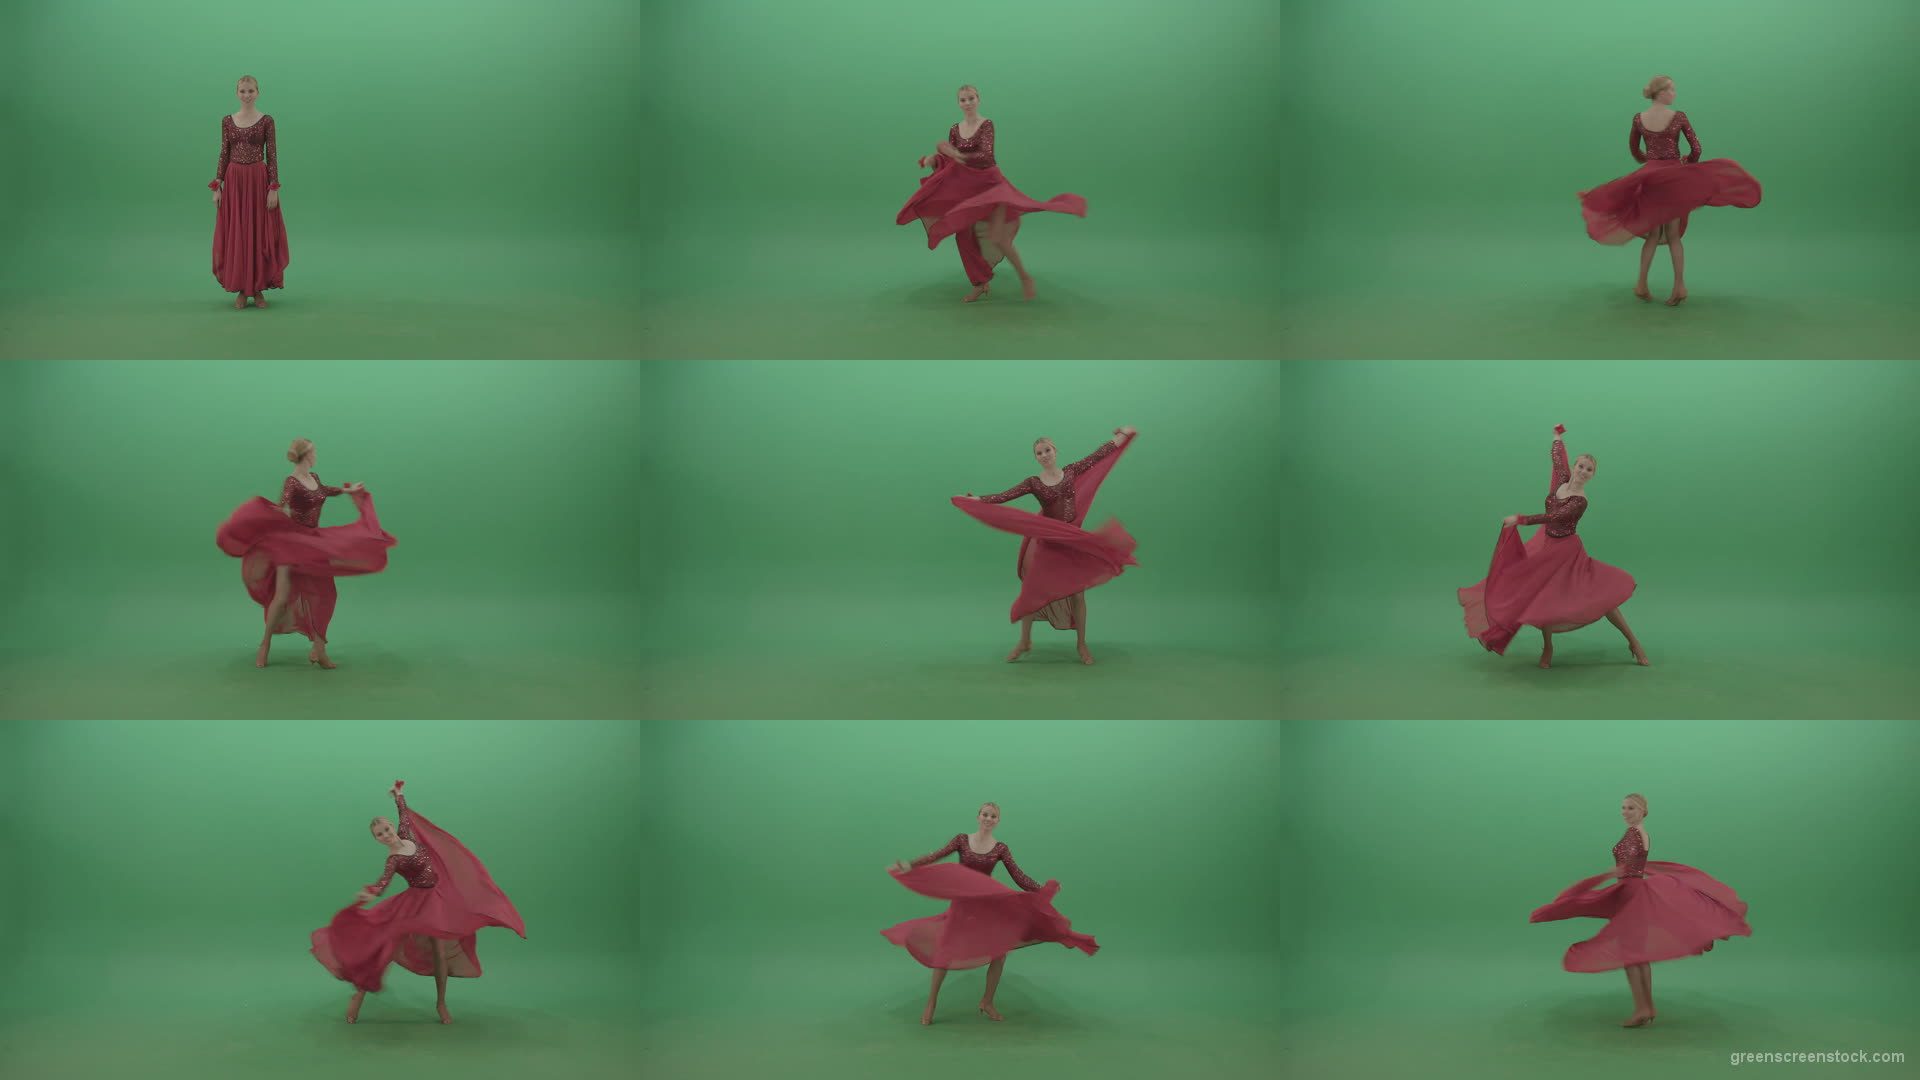 Spinning-woman-in-red-dress-showing-dance-flamenco-moves-over-green-screen-4K-Video-Footage-1920 Green Screen Stock